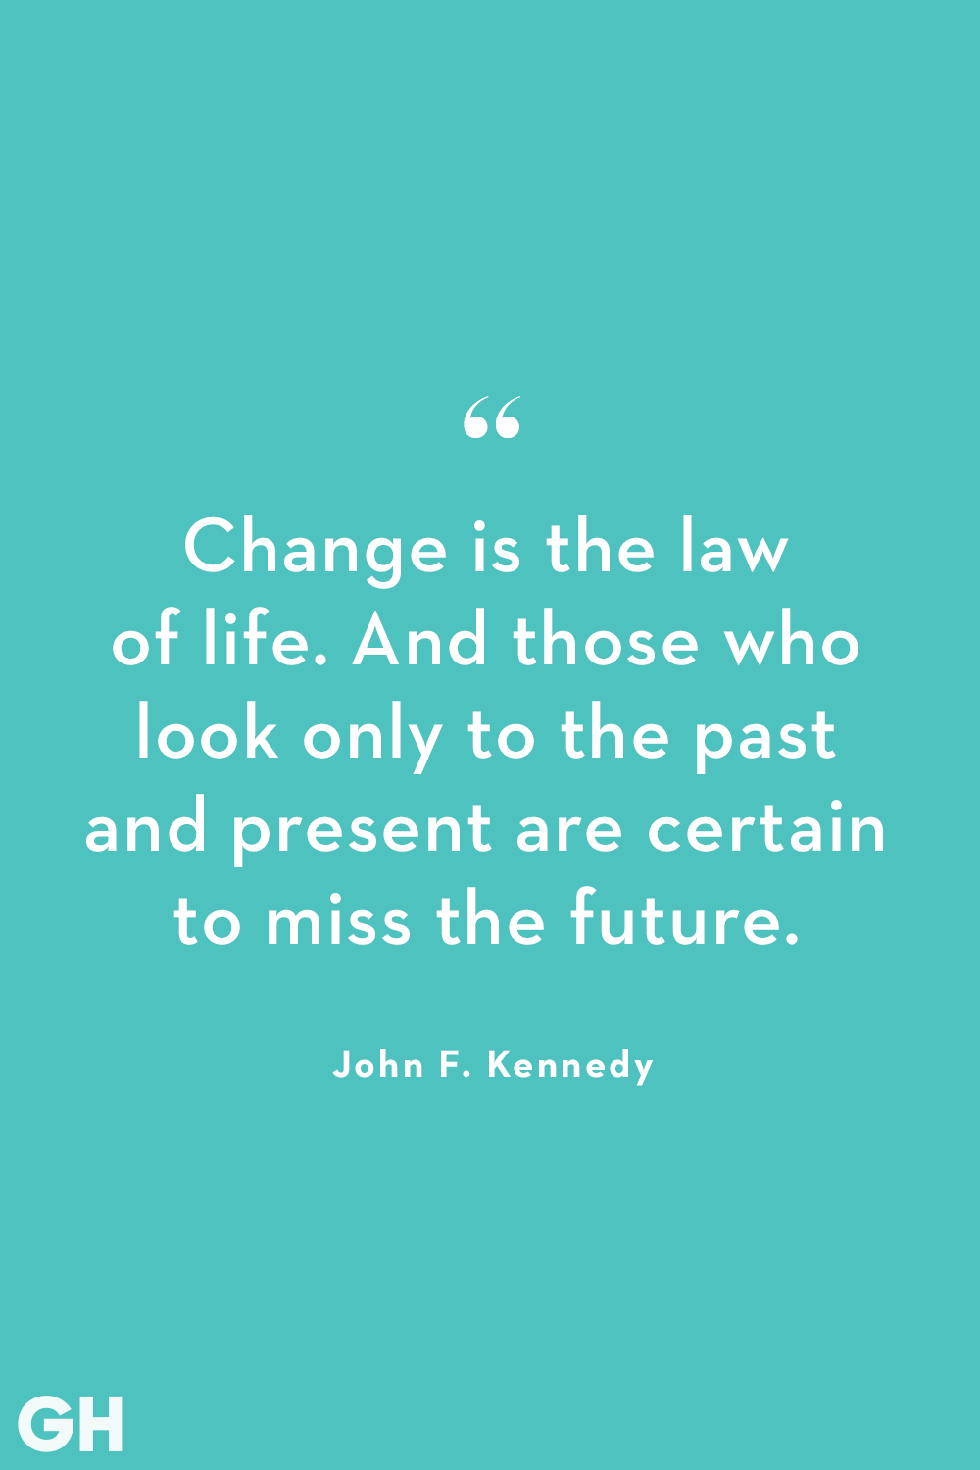 quotes-about-change-john-f-kennedy-1548343272.png